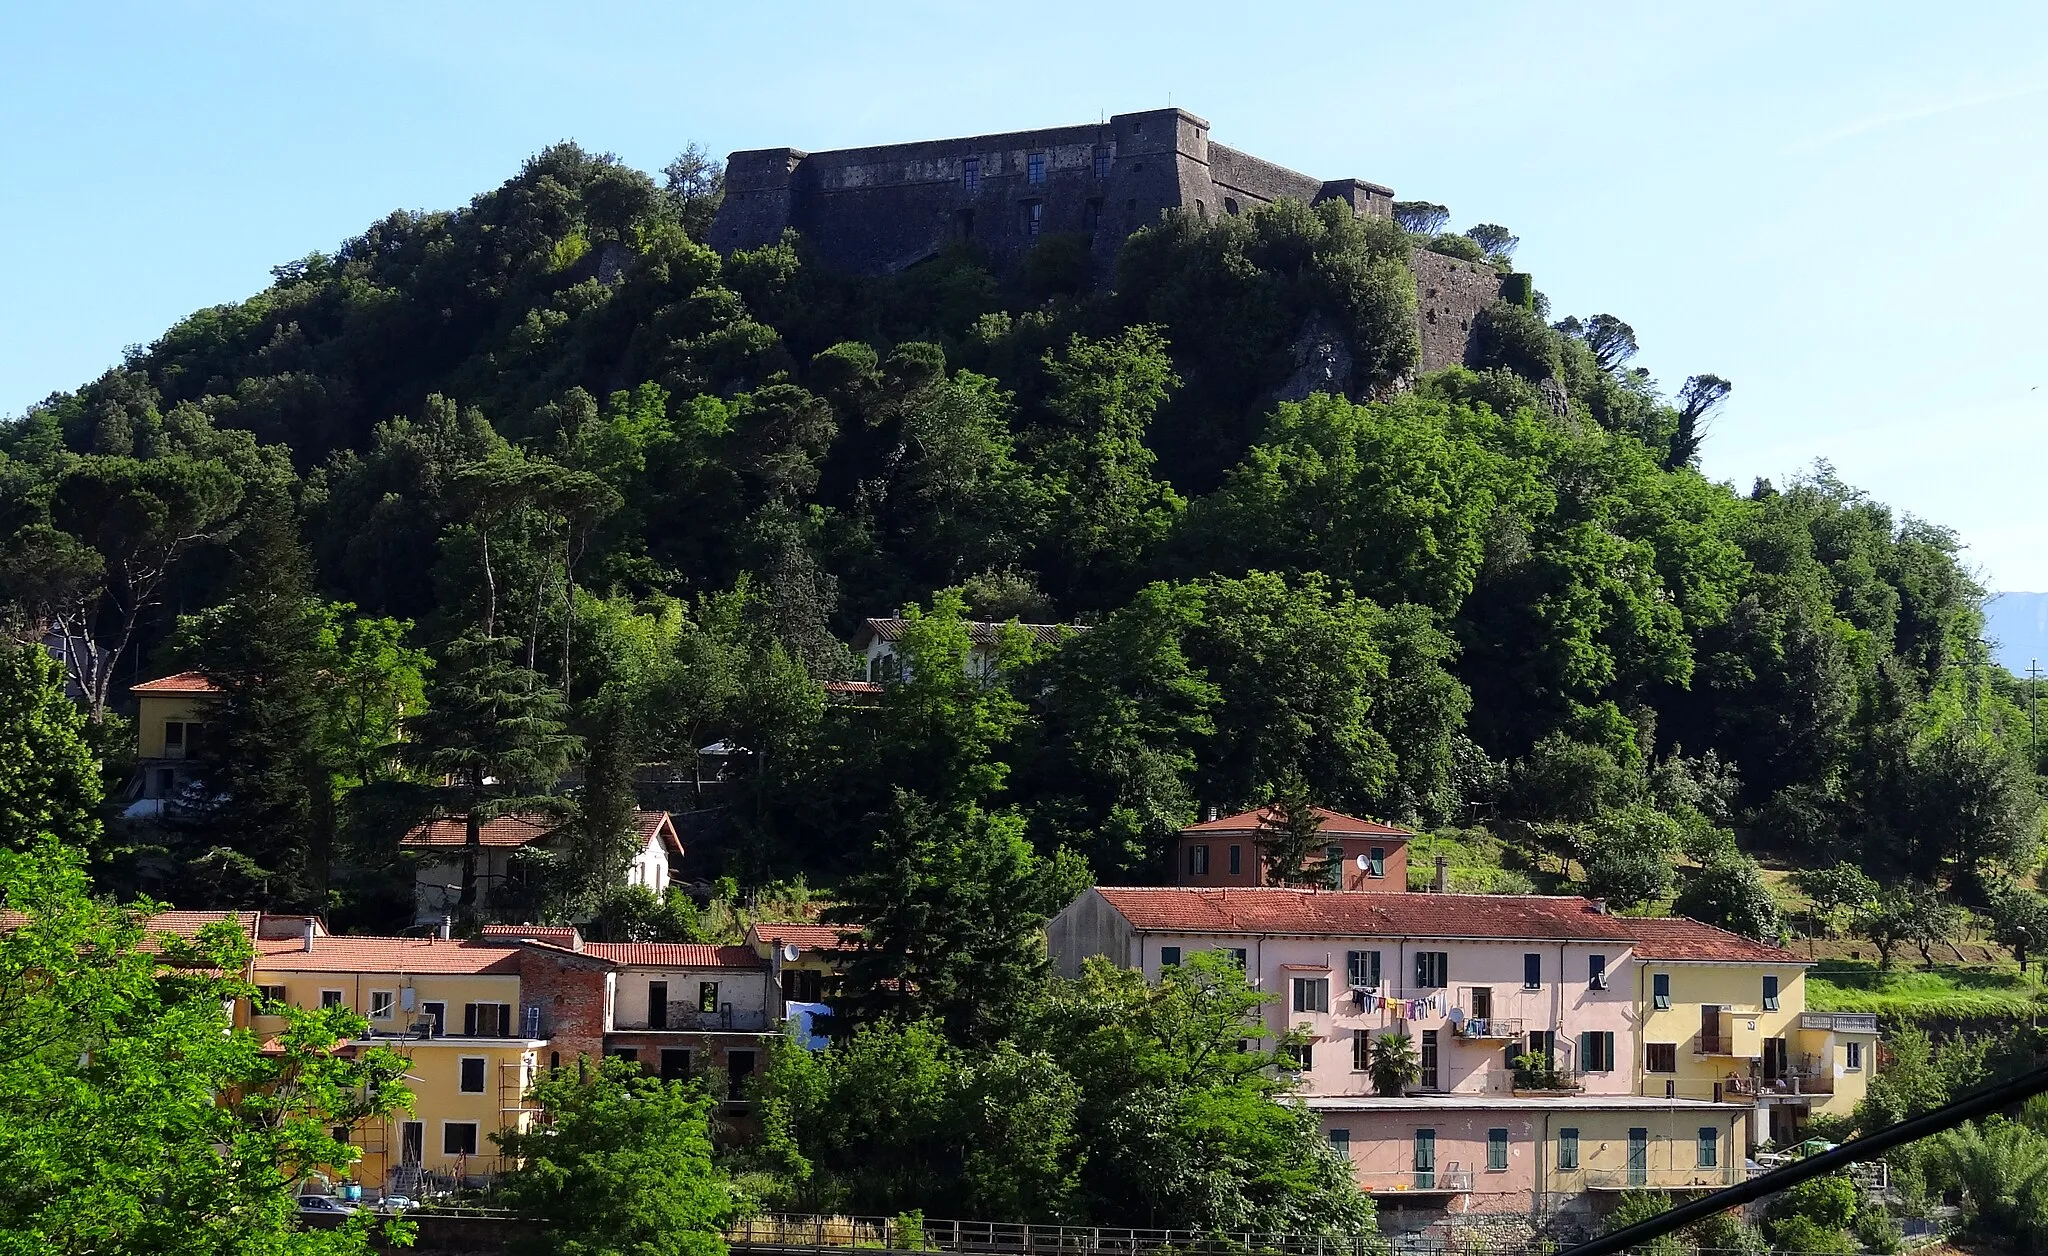 Photo showing: The Fortress Brunella above Aulla, built in the 16th century and today used as a museum.